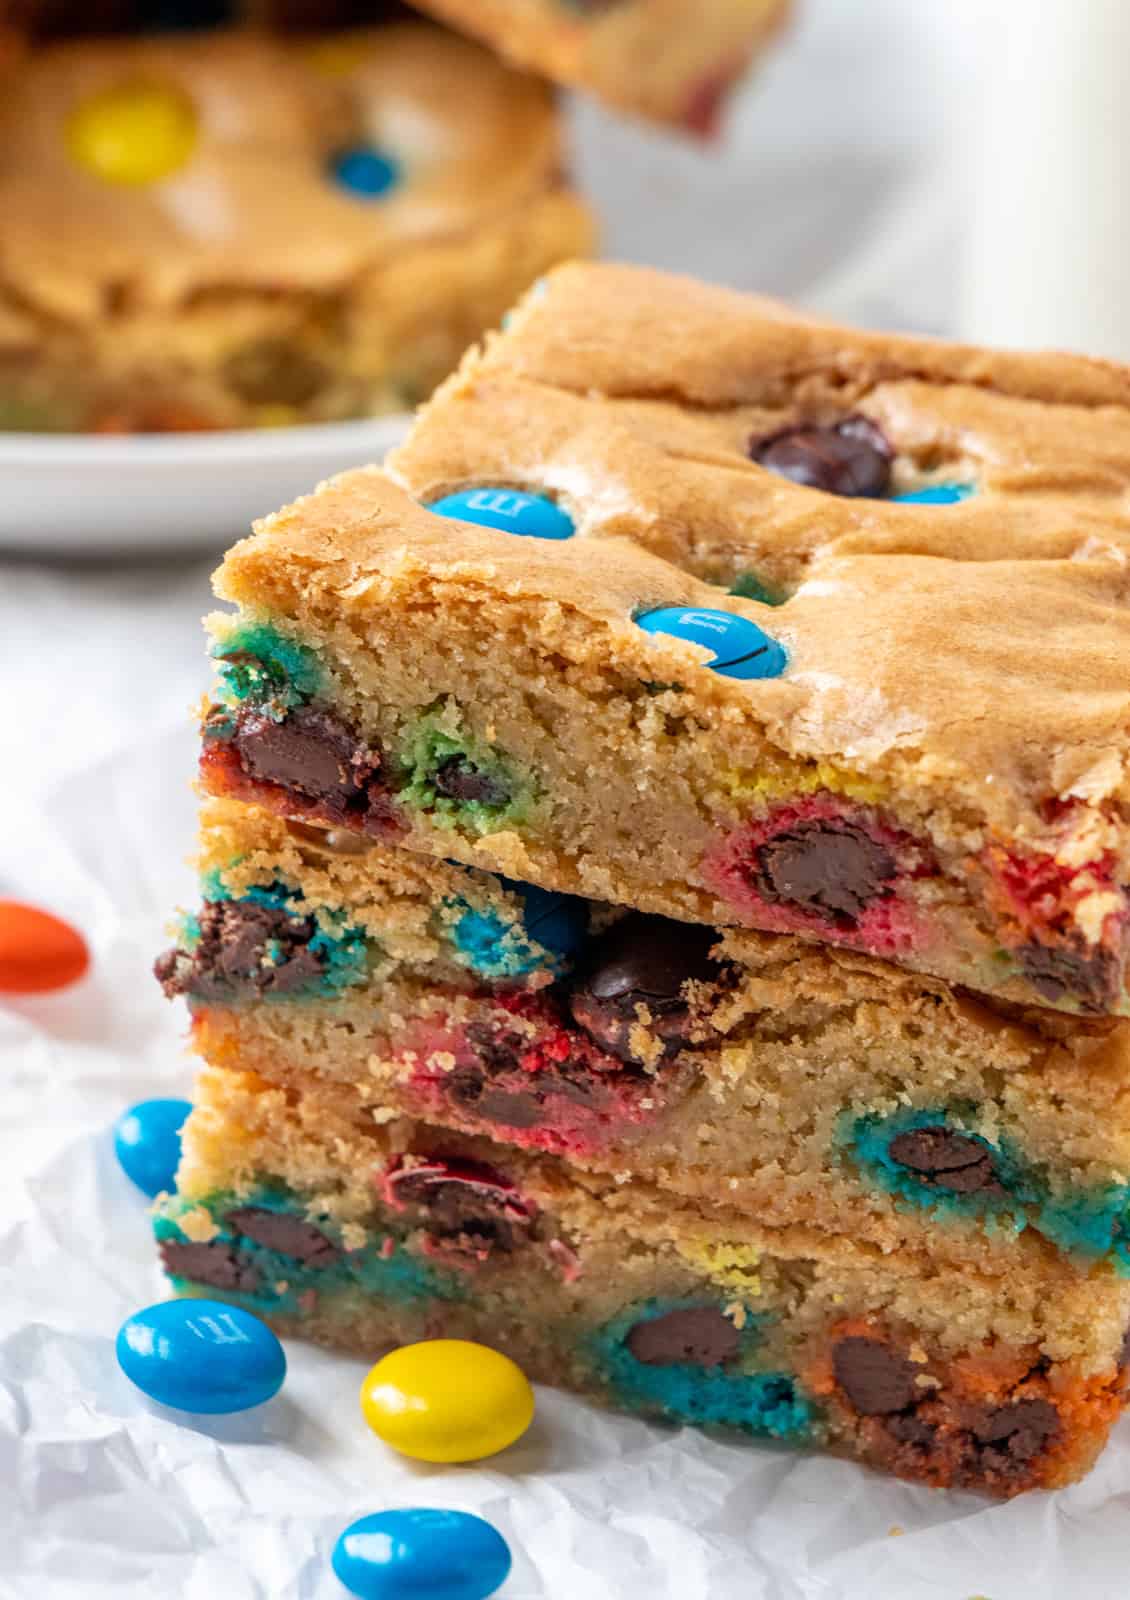 Up close of side of blondies showing the baked in candies